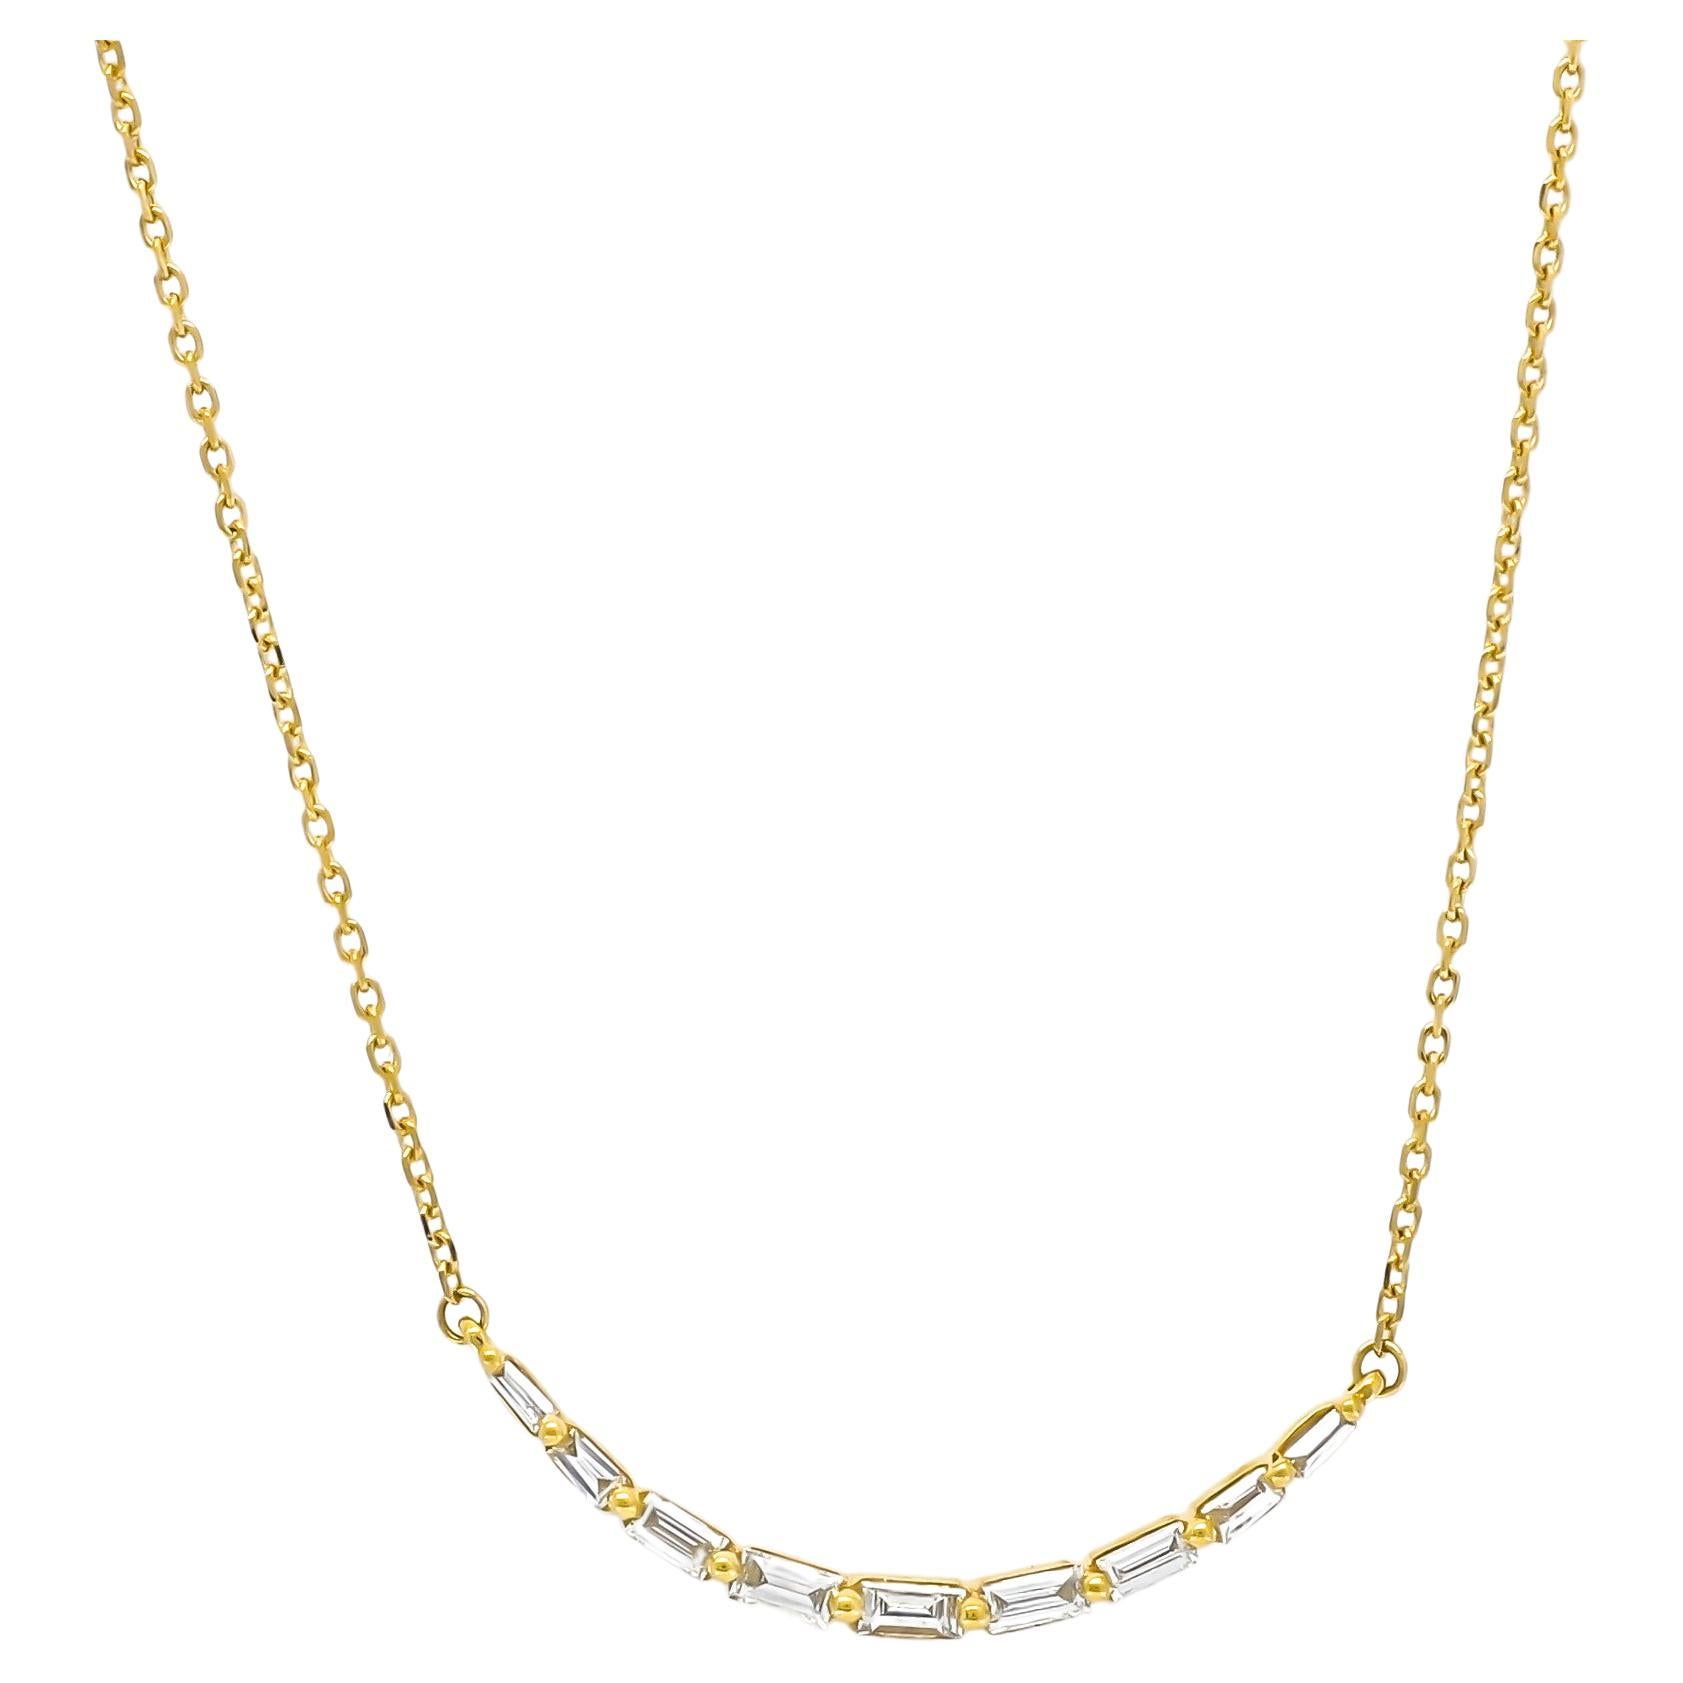 Natural Diamonds Necklace 0.25 cts 18KT Yellow Gold Single Row Baguette Necklace